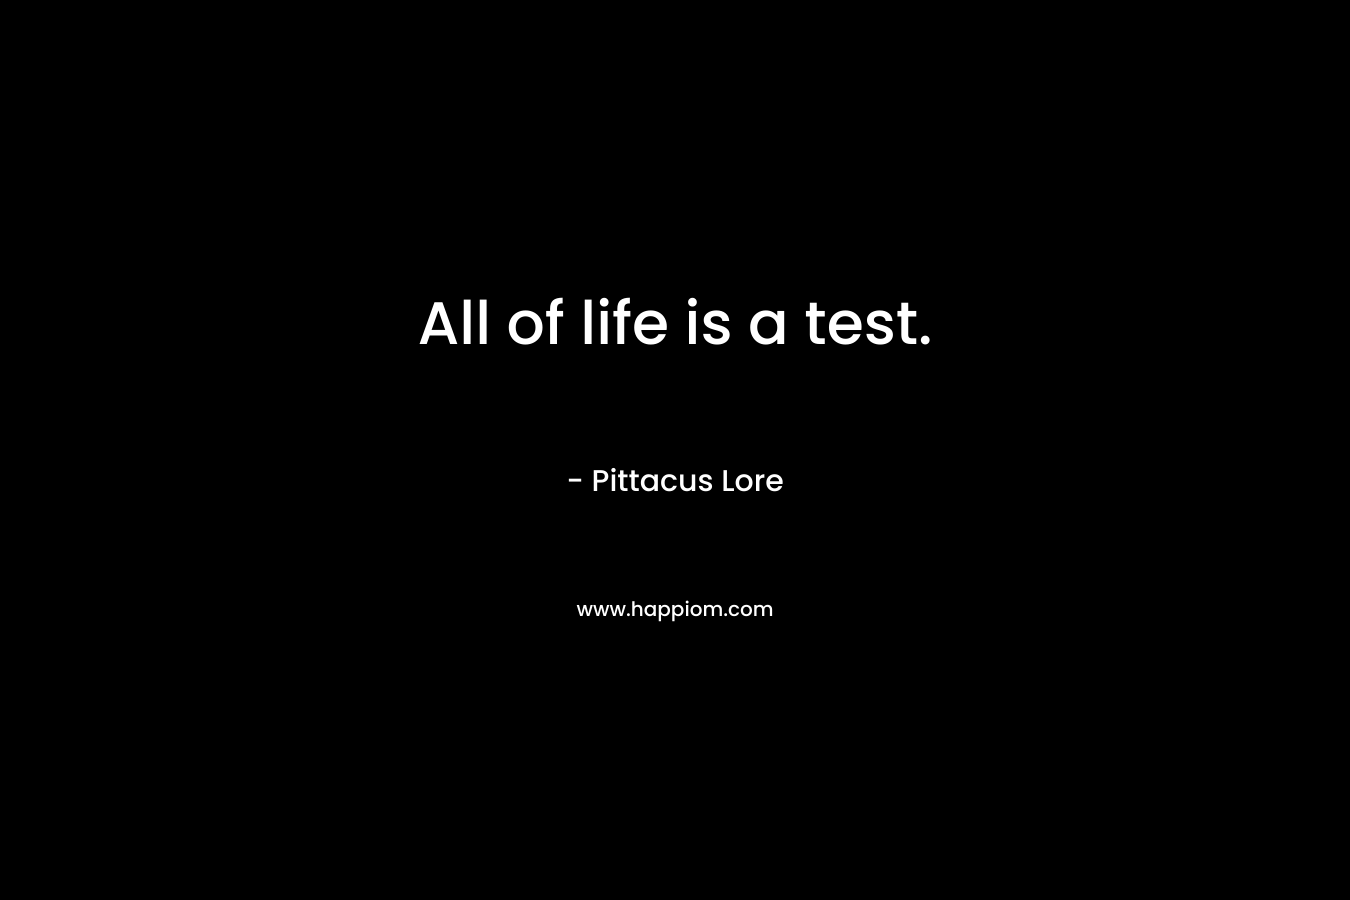 All of life is a test.